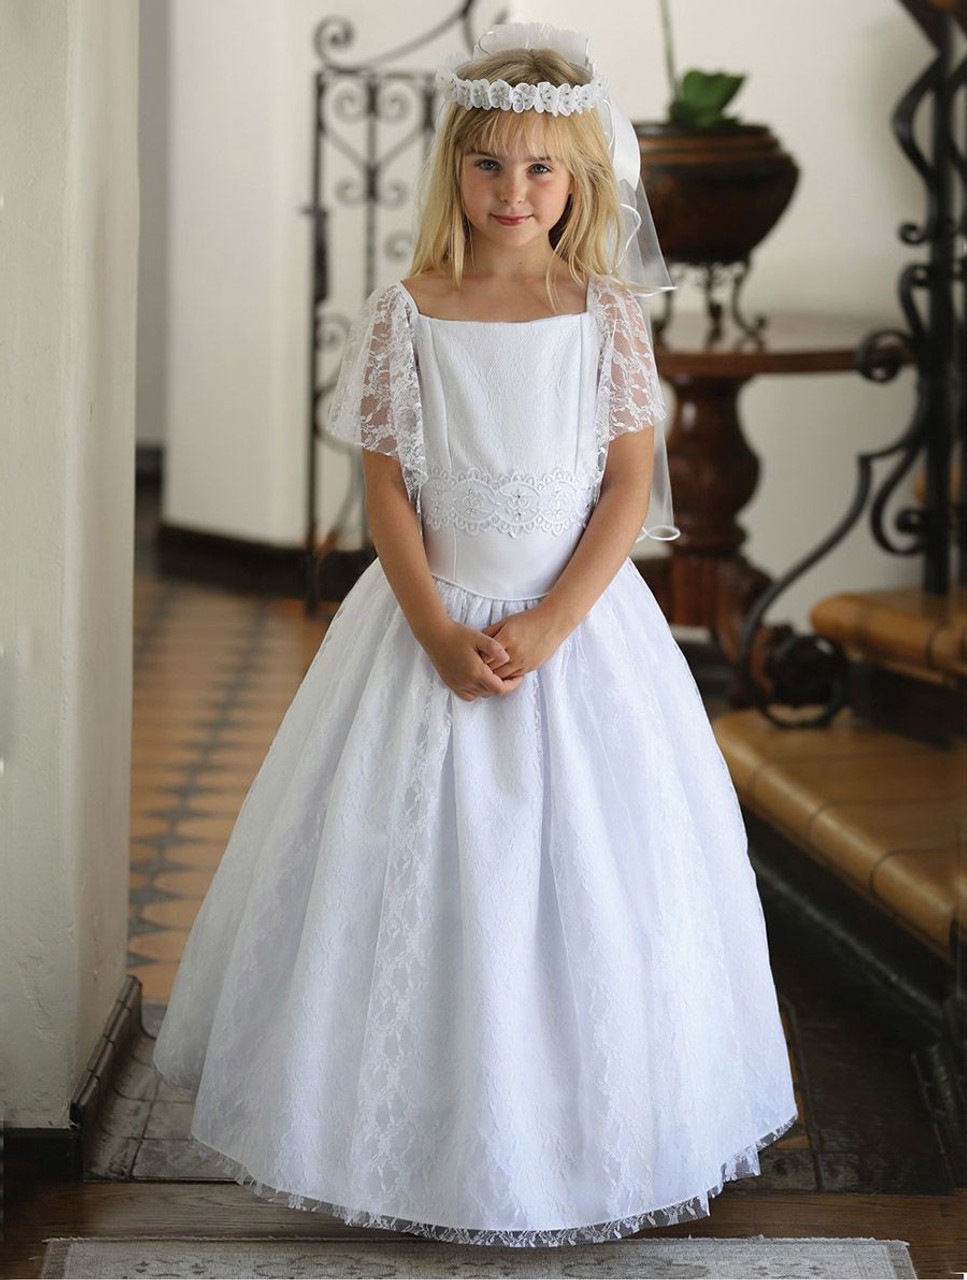 White Satin Dress w/ Lace Overlay & Flutter Sleeves - Pink Princess